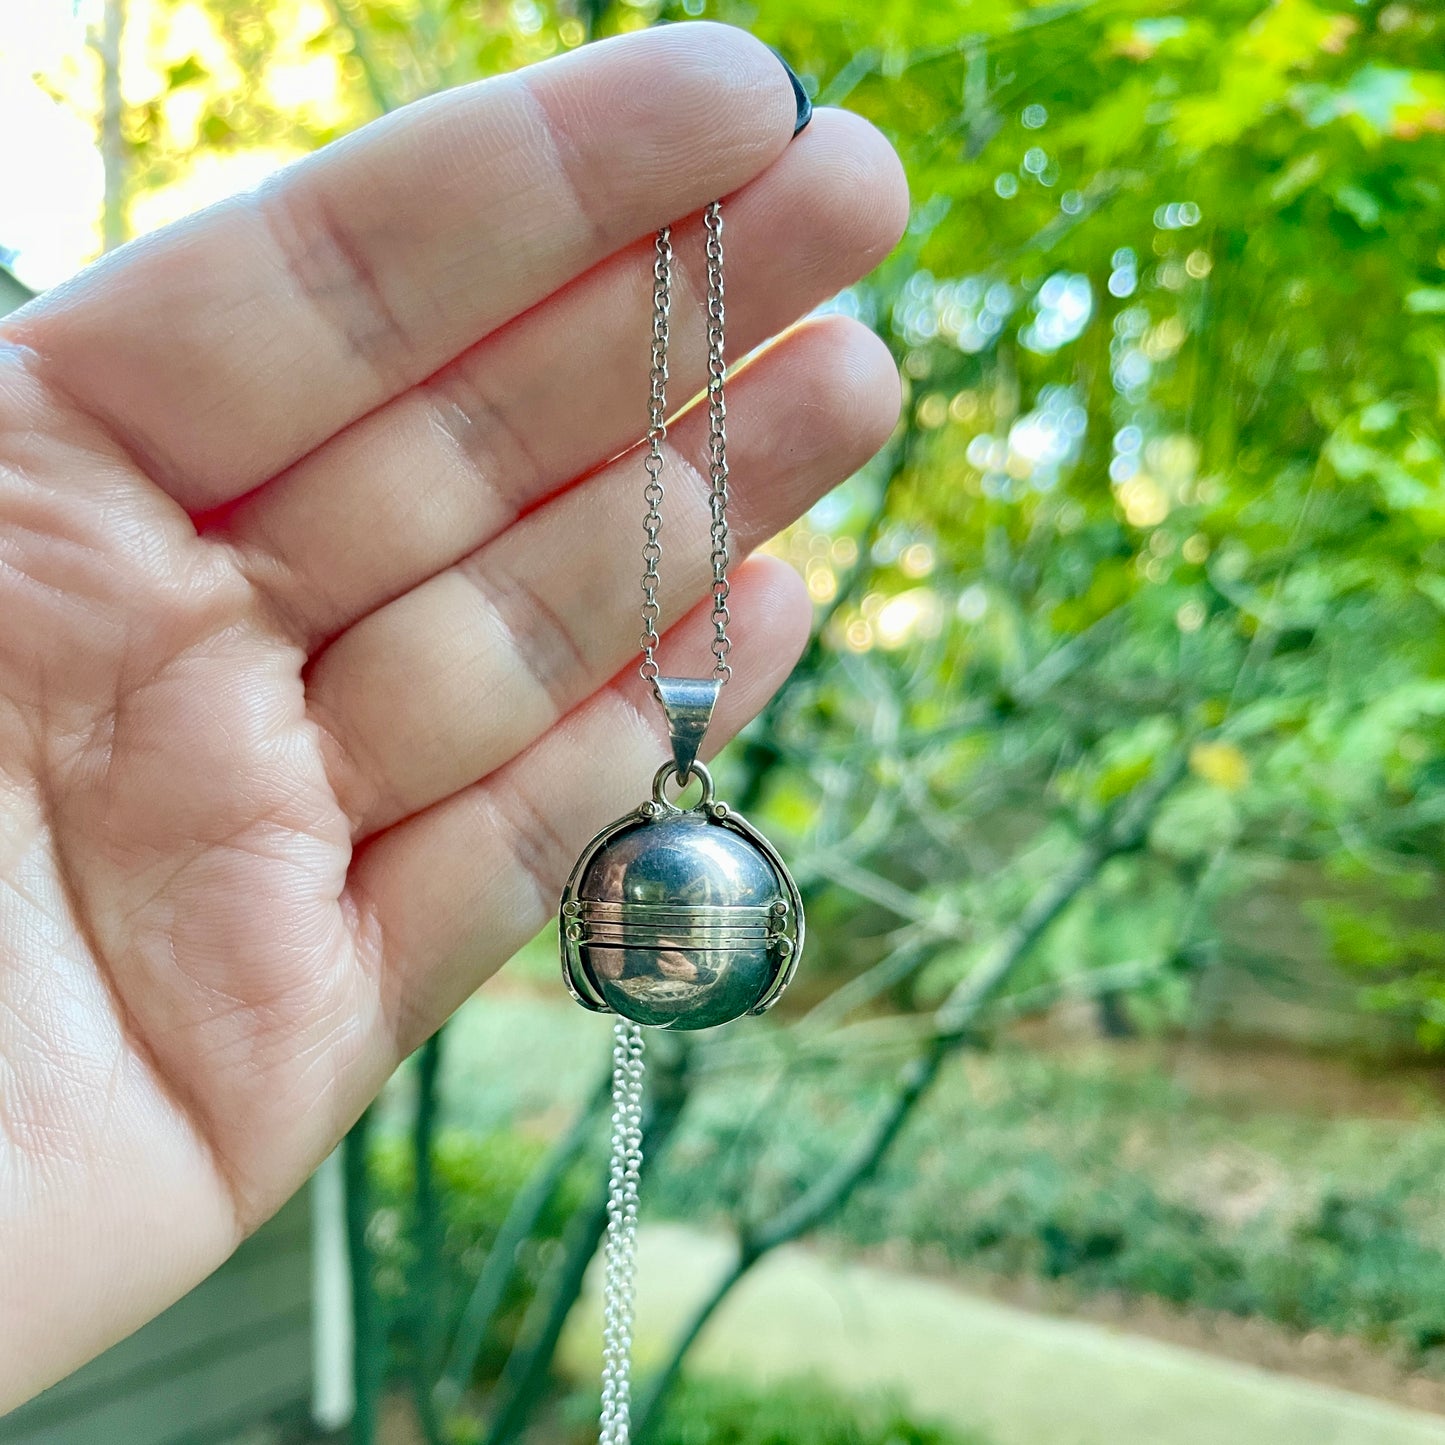 Silver Snitch Six Panel Sterling Locket Necklace